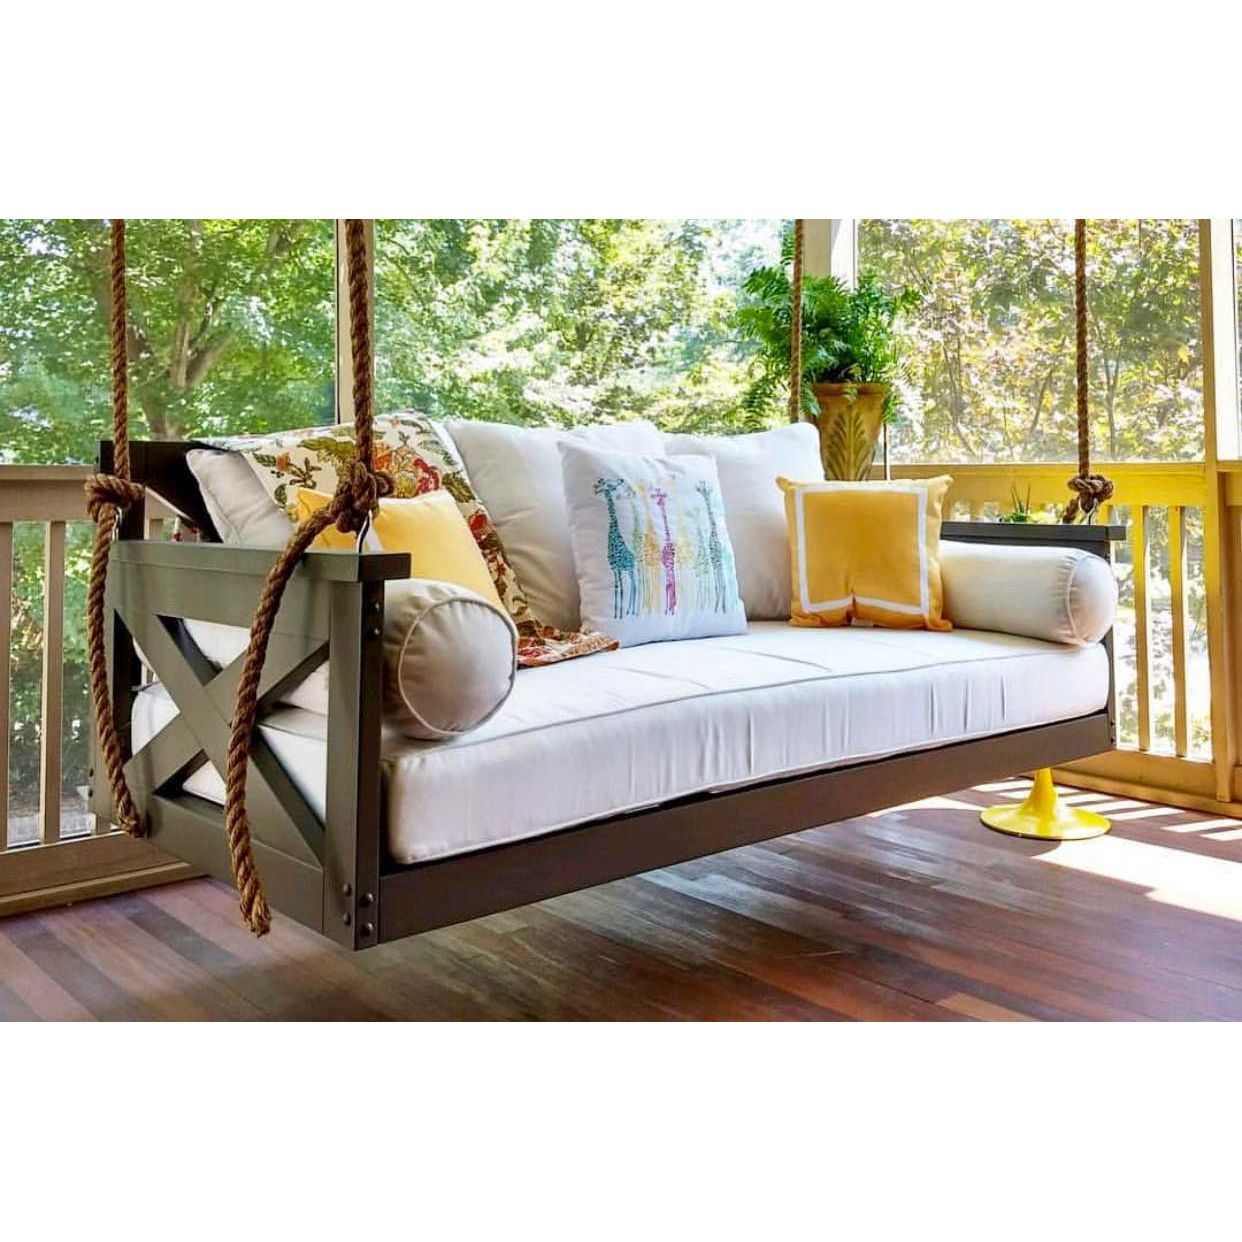 Lowcountry Swing Beds Lowcountry The Edisto Swing Bed LCSEDI101